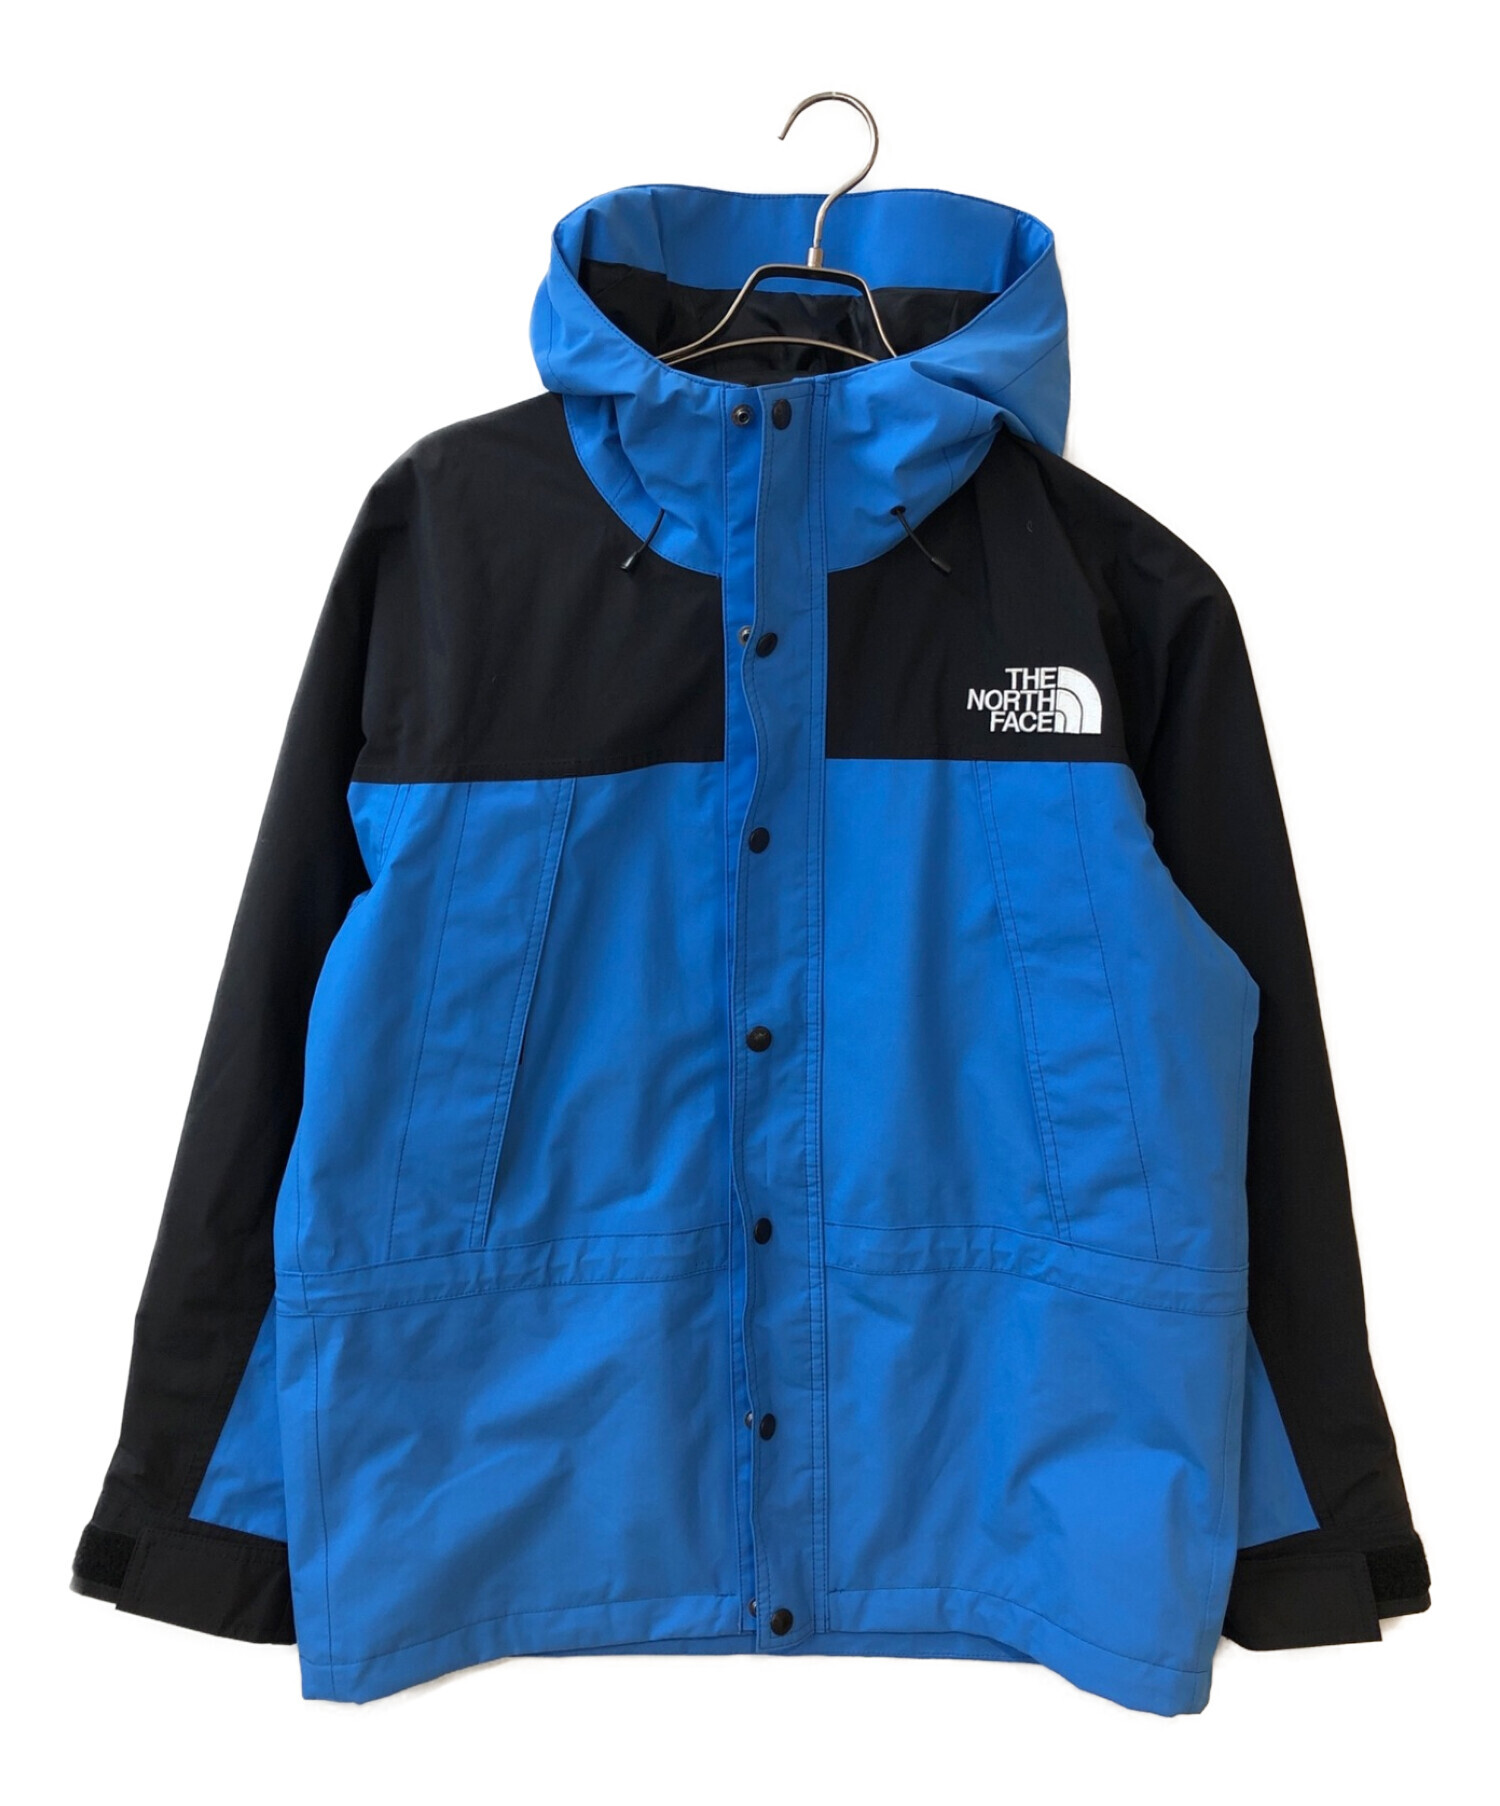 Mサイズ THE NORTH FACE mountain jacket